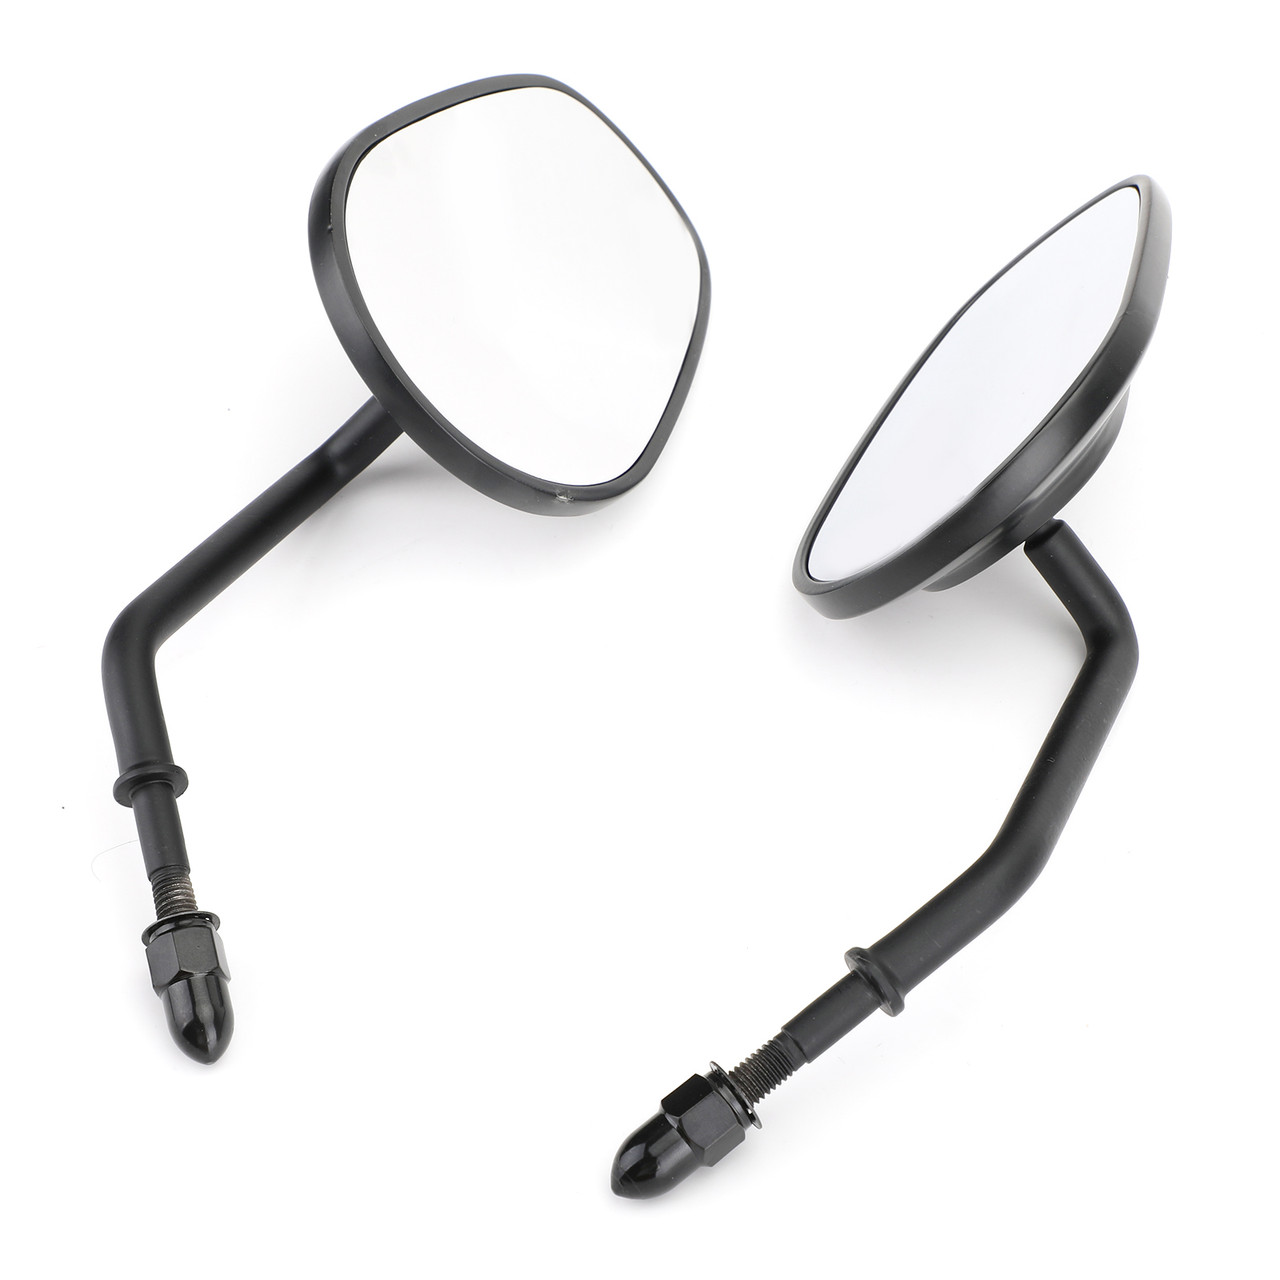 1 Pair Mirrors(Left & Right) Fit For HARLEY Switchback FLD 2012-2016 Wide Glide FXDWG Roadster XL1200CX 2016 Road King FLHR 1994-2016 Black